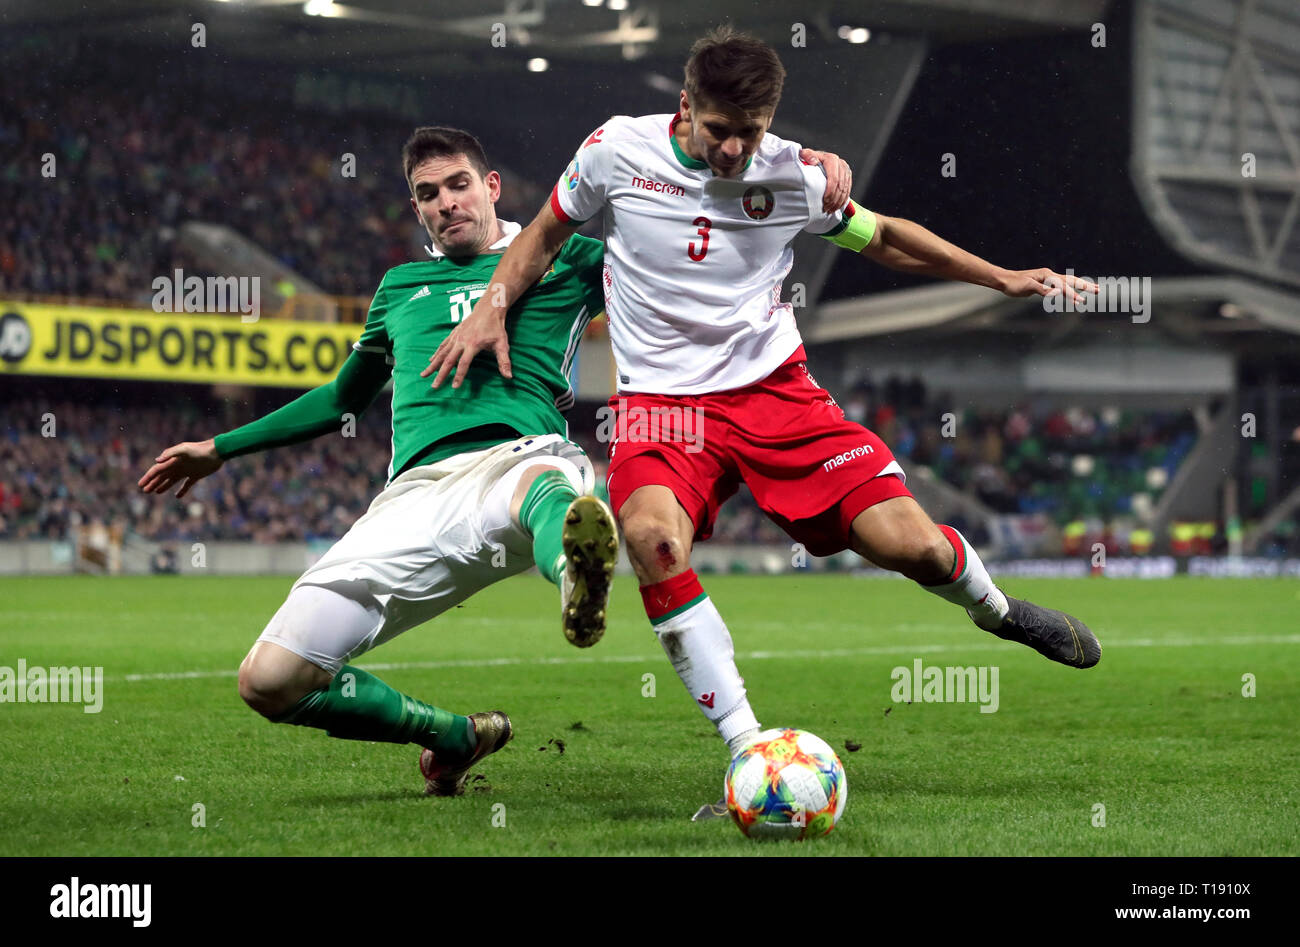 Northern Ireland's Kyle Lafferty (left) and Belarus' Aleksandr Martynovich battle for the ball during the UEFA Euro 2020 Qualifying, Group C match at Windsor Park, Belfast. Stock Photo